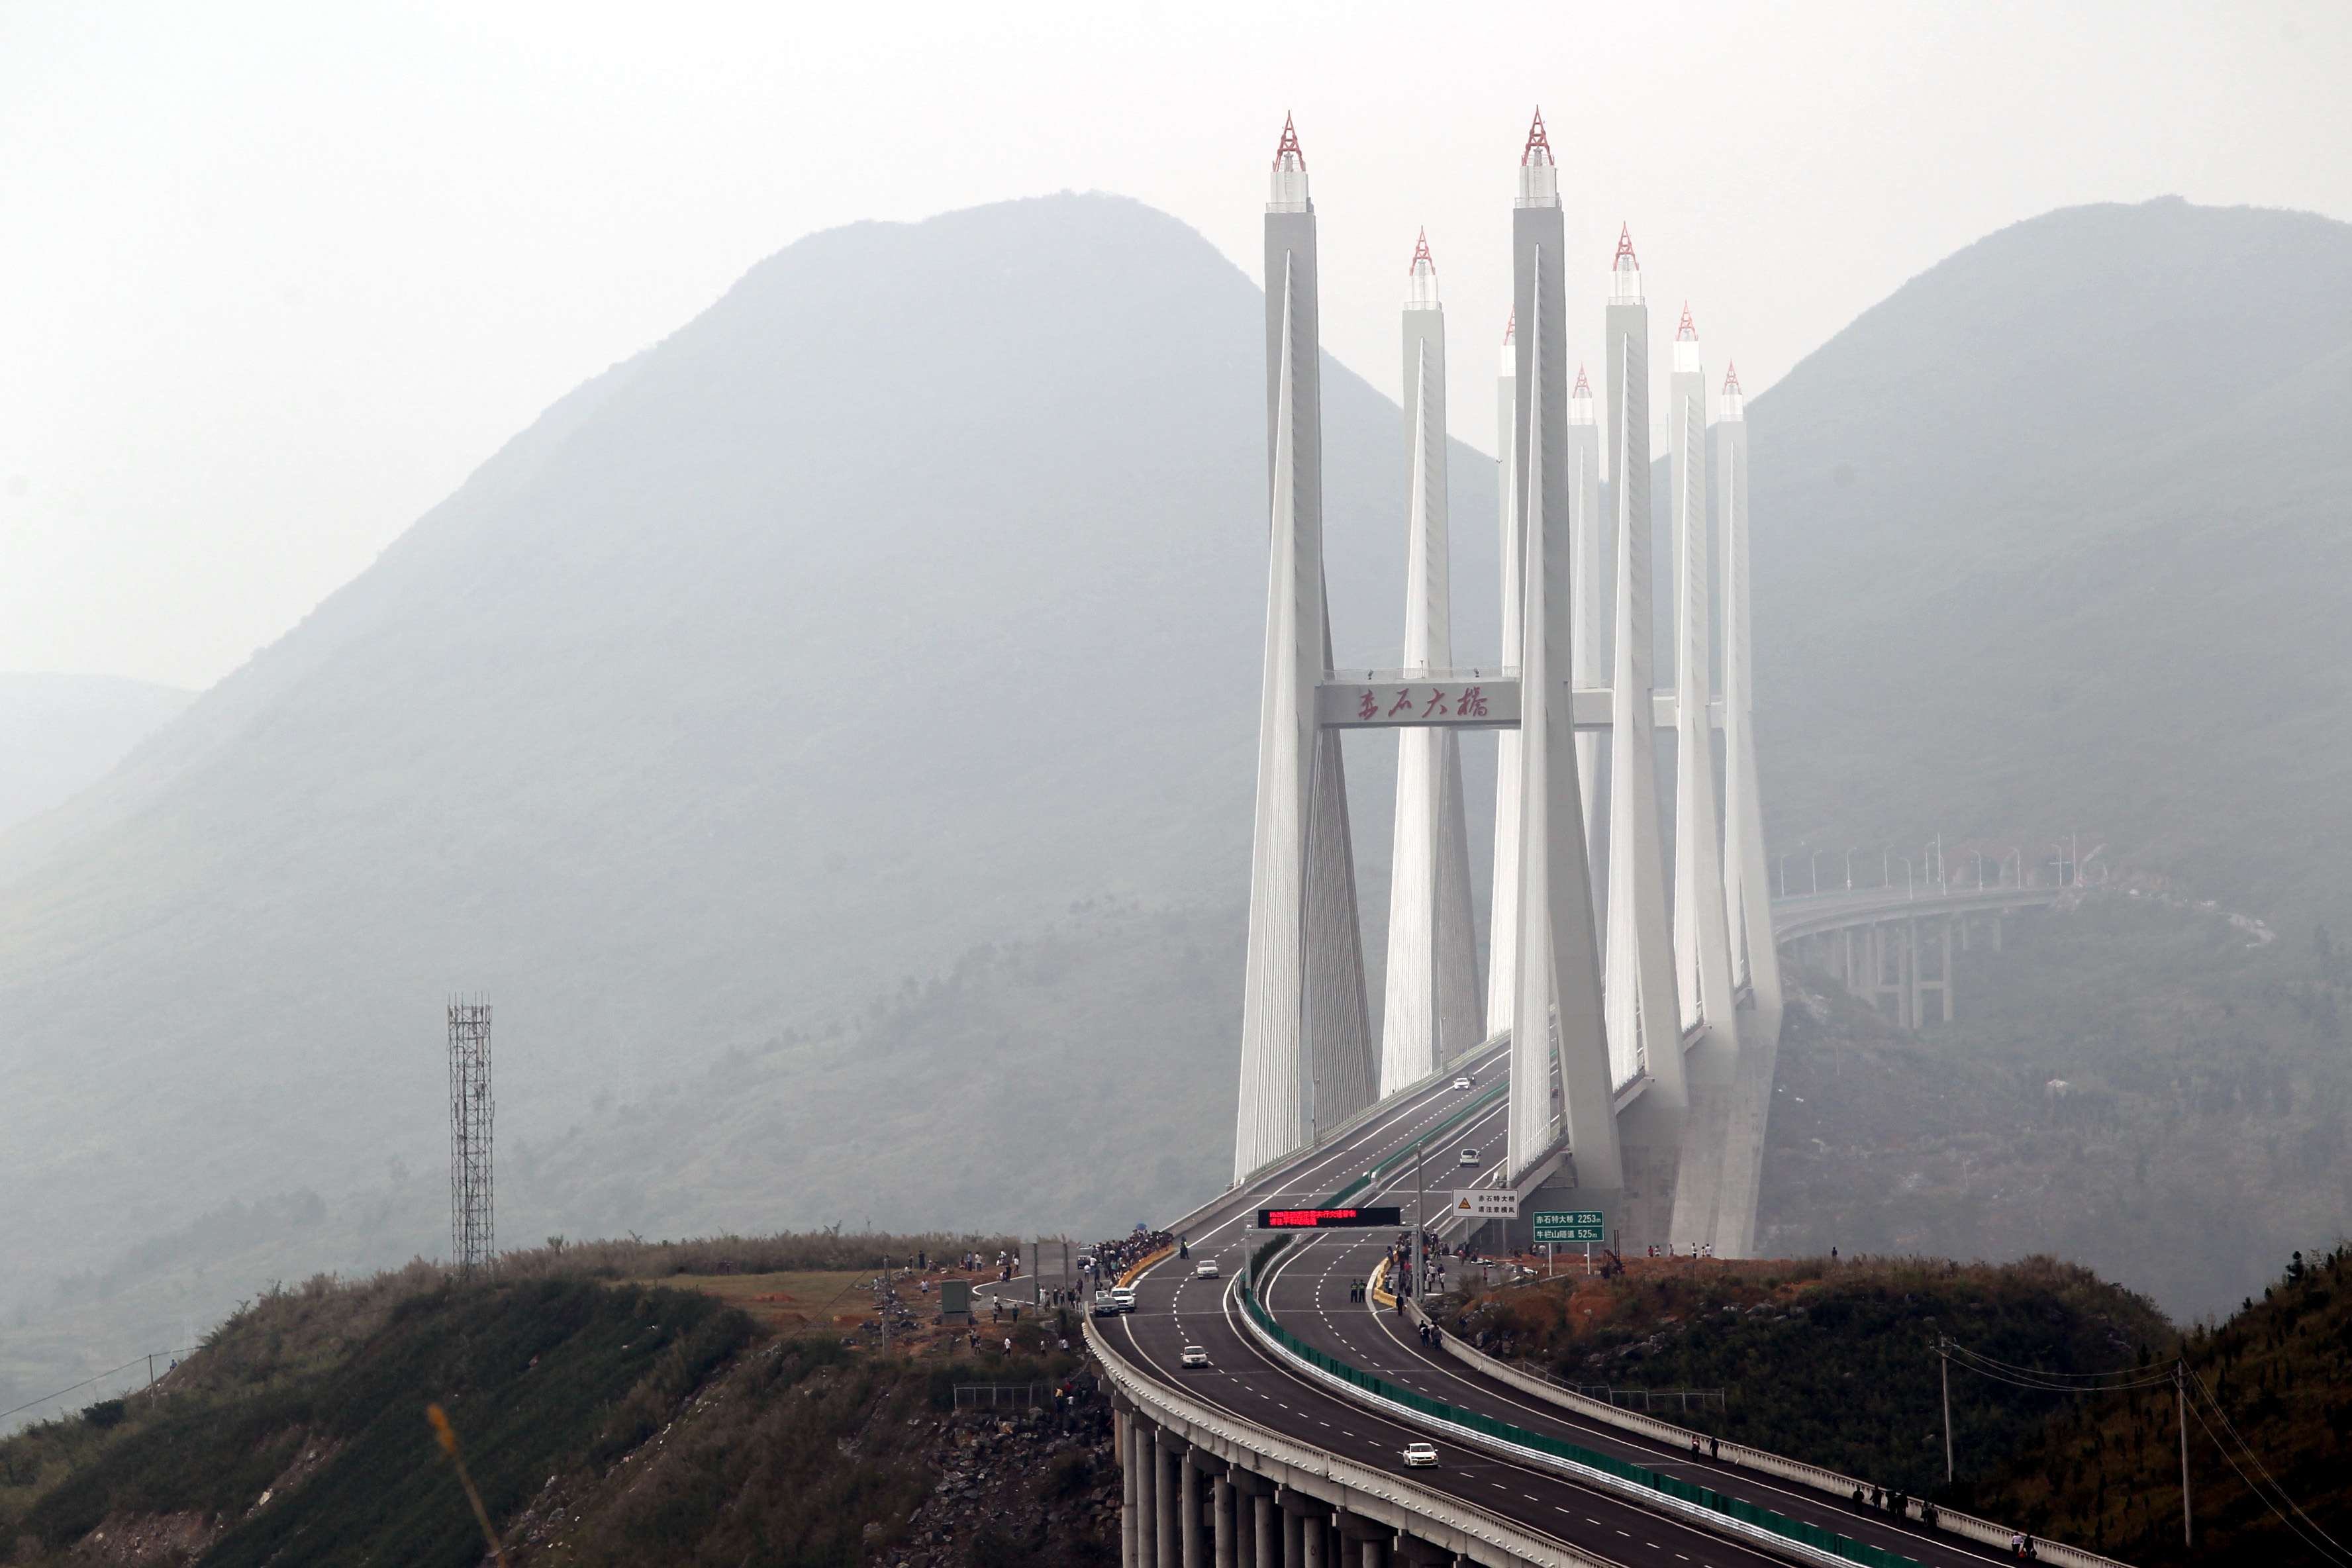 The Chishi Bridge in Yizhang County of Chenzhou City, central China's Hunan Province. PPPs are seen as a means of broadening the financing options available to regional and local governments for future infrastructure development, by introducing private investors. Photo: Xinhua